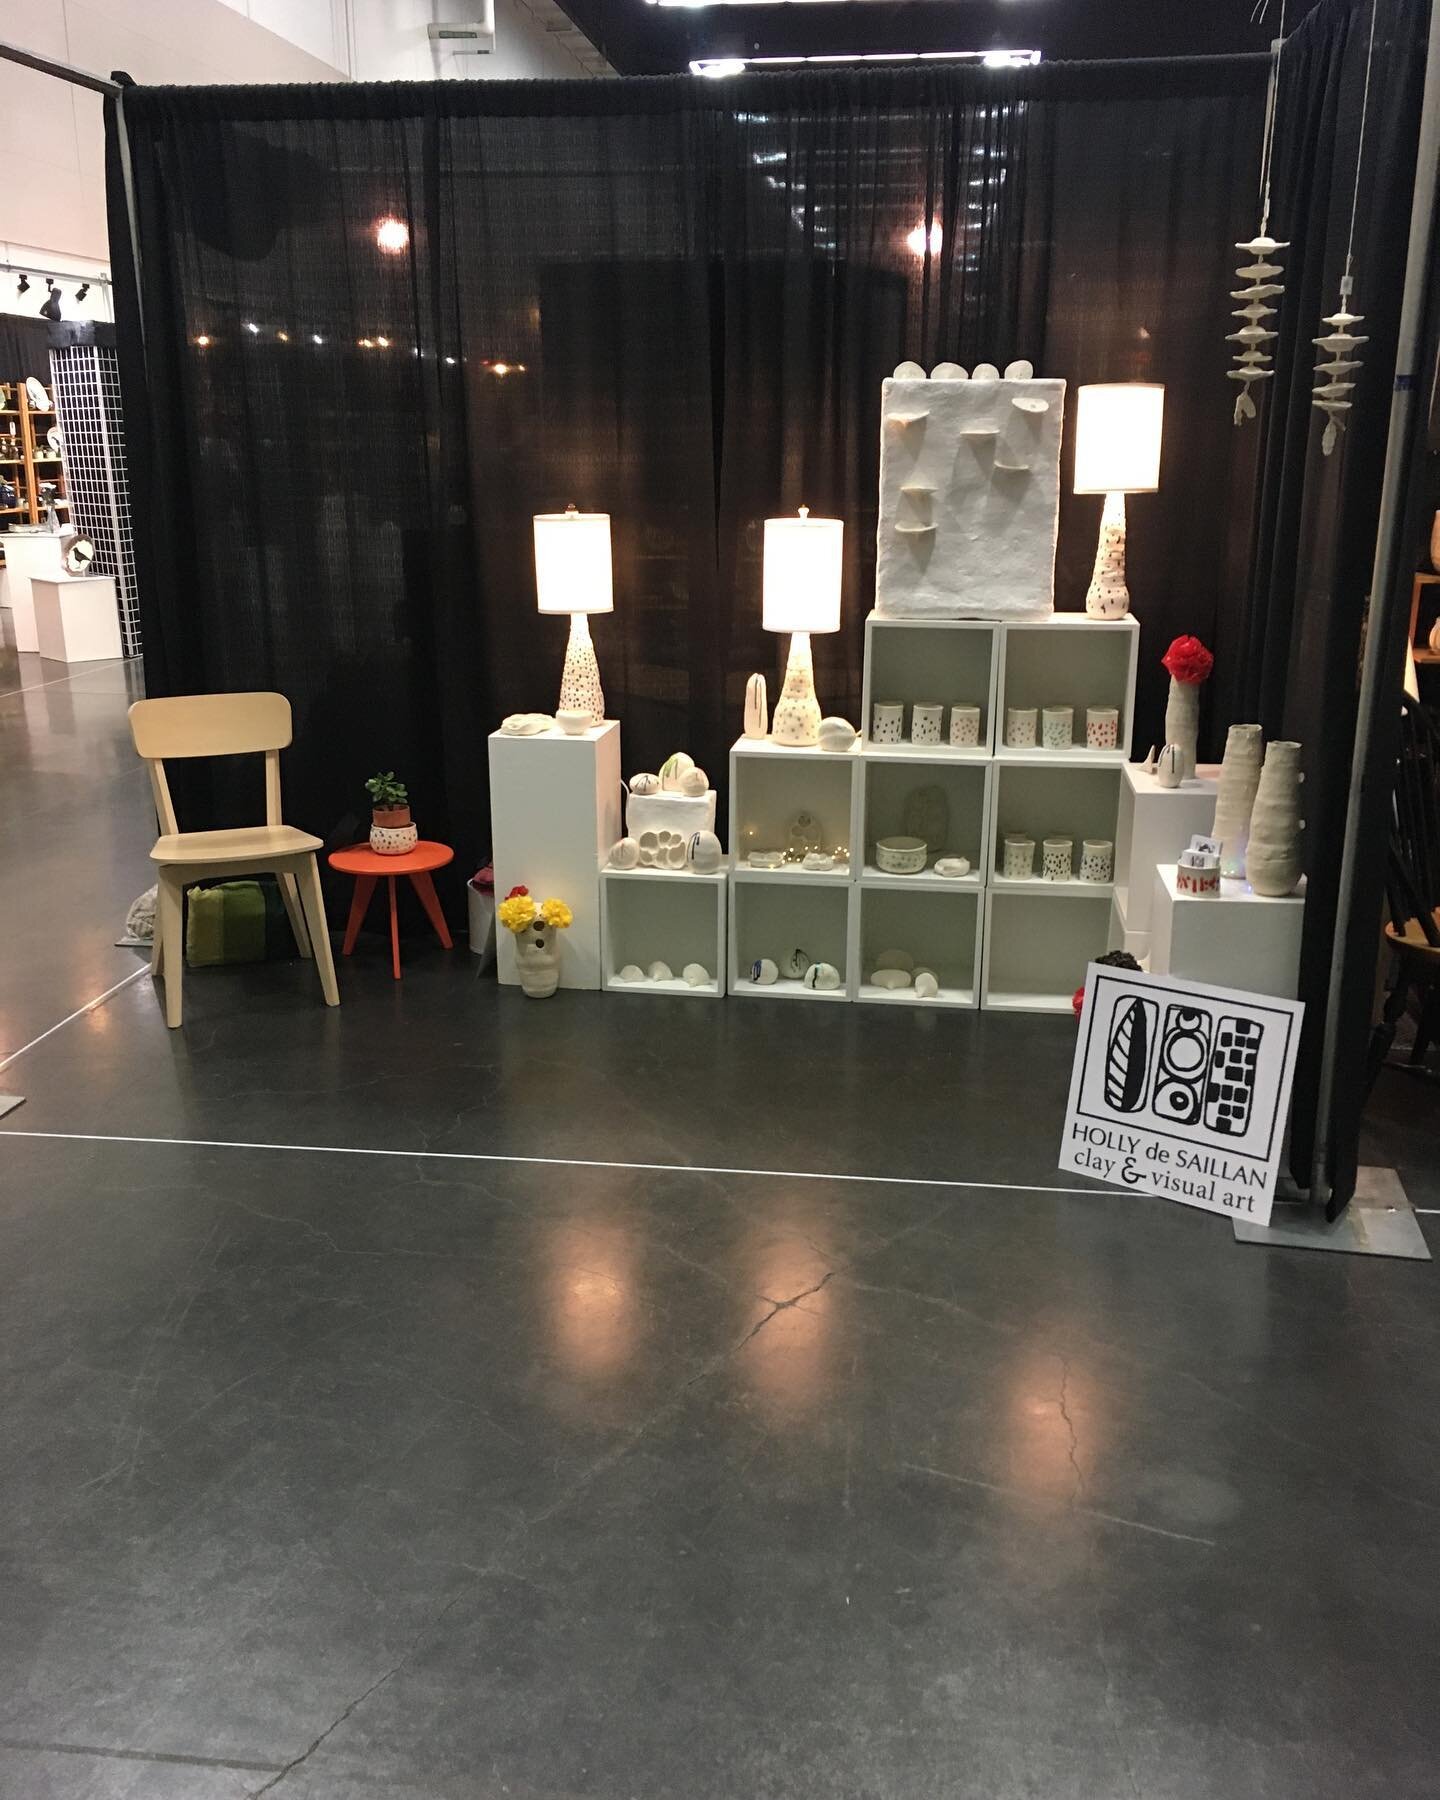 My little booth at the three day Ceramic Showcase at the Convention Center in Portland.
@ceramicshowcase  #porcelain  Till 6:00 today and again Sunday 10 Till 4:00